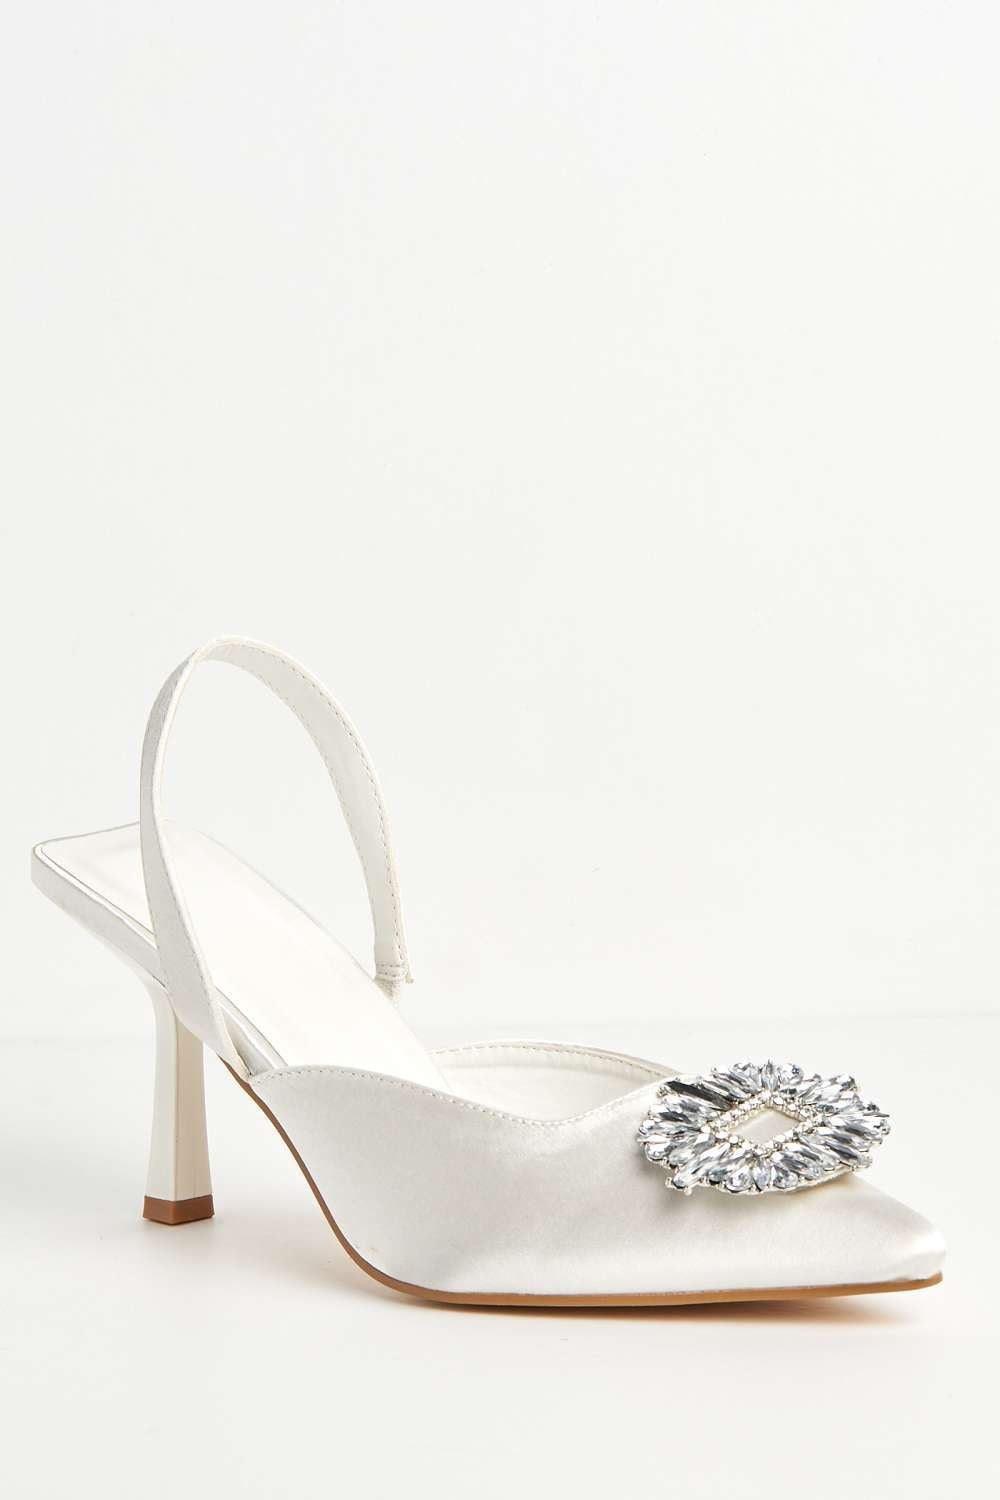 Miss Diva Amira Diamante Brooch Sling Back Court Shoes in Ivory Satin